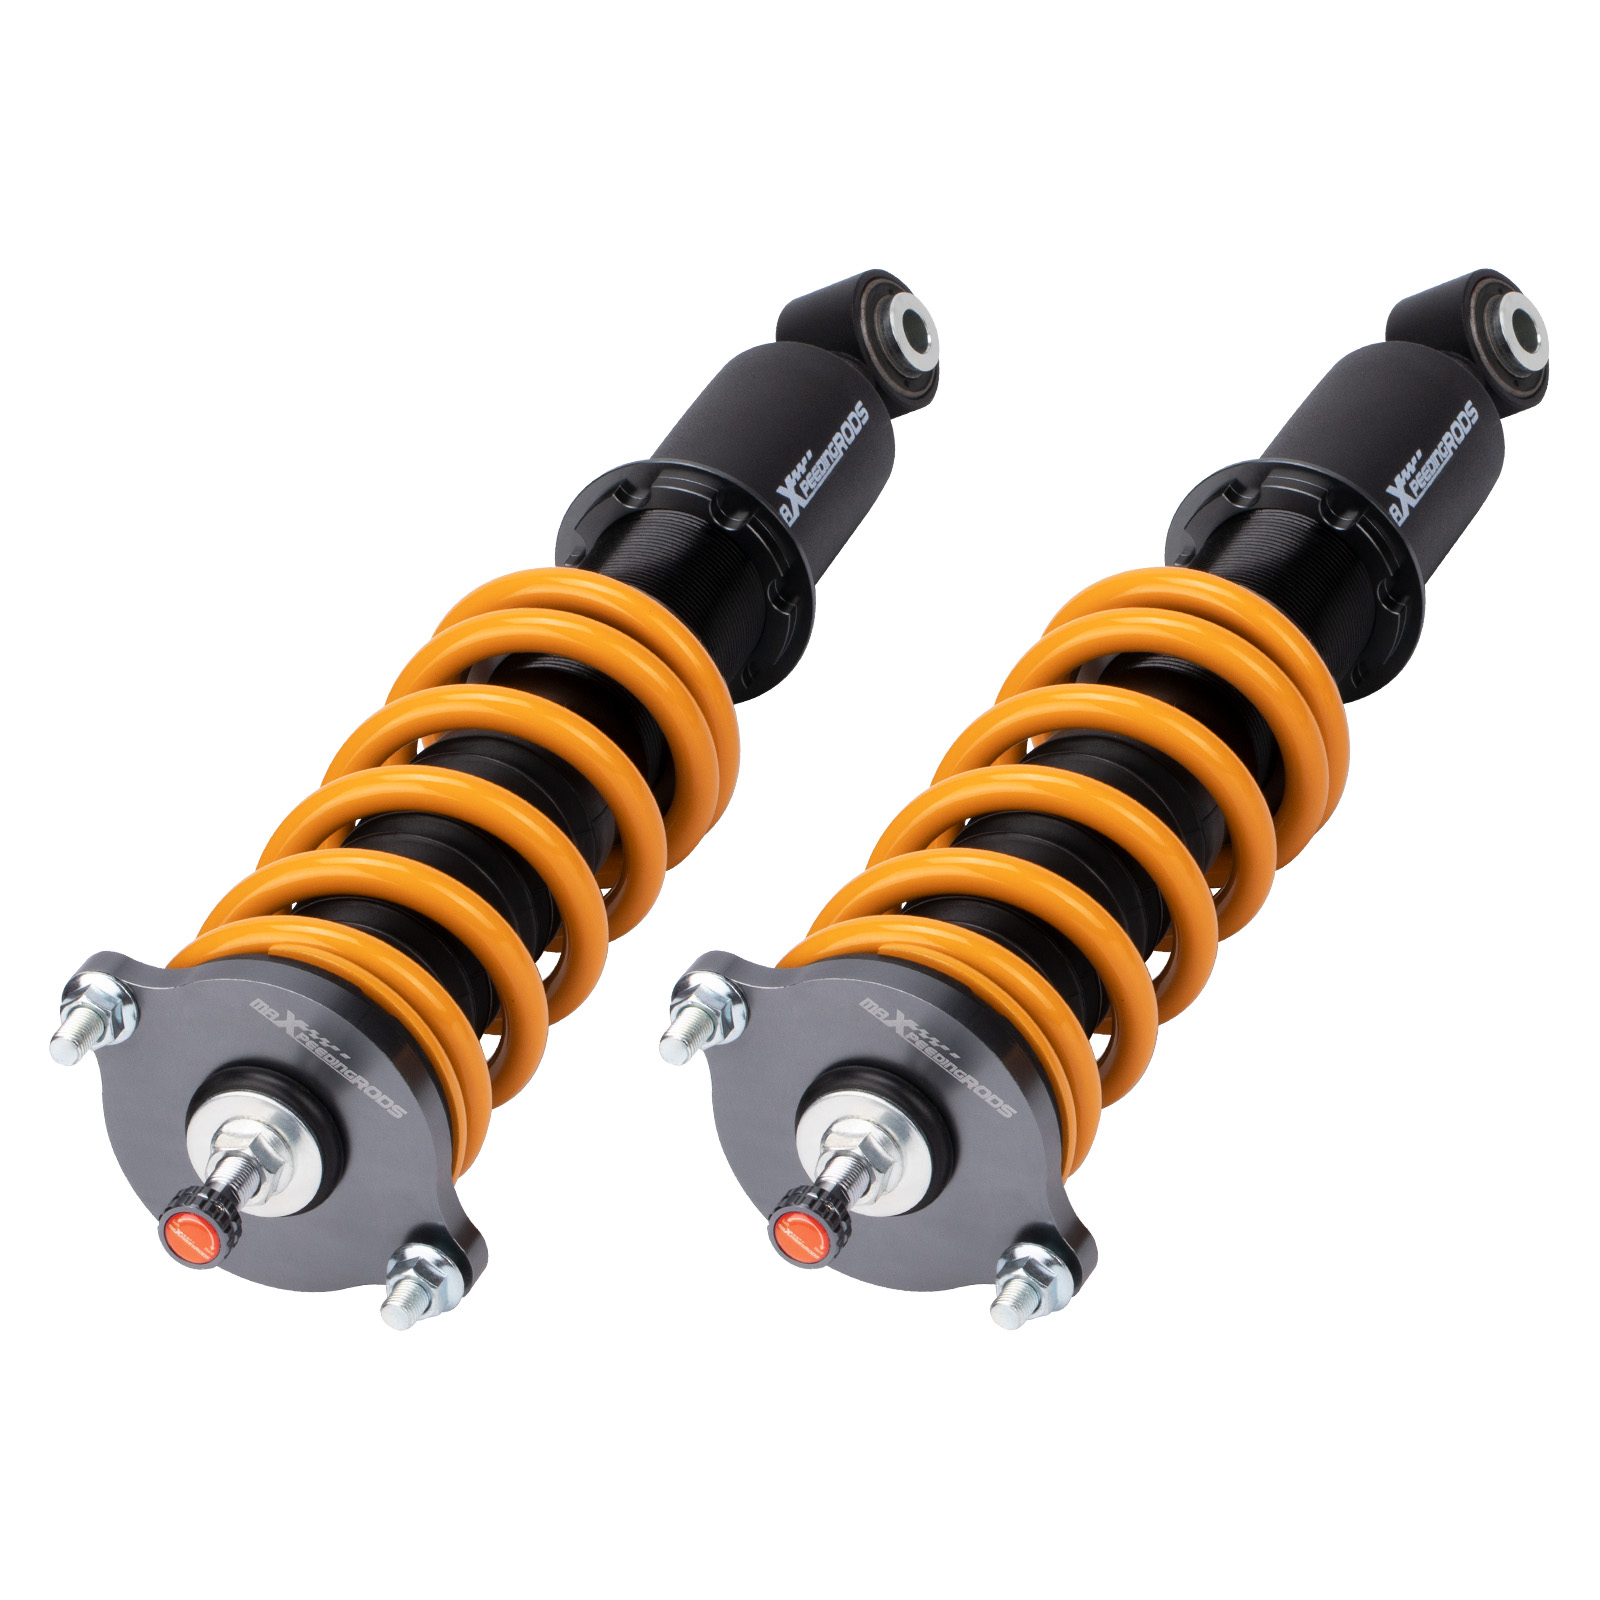 24 Way Damping Adjustable Coilover Suspension Kit for SUBARU OUTBACK 2000-2004